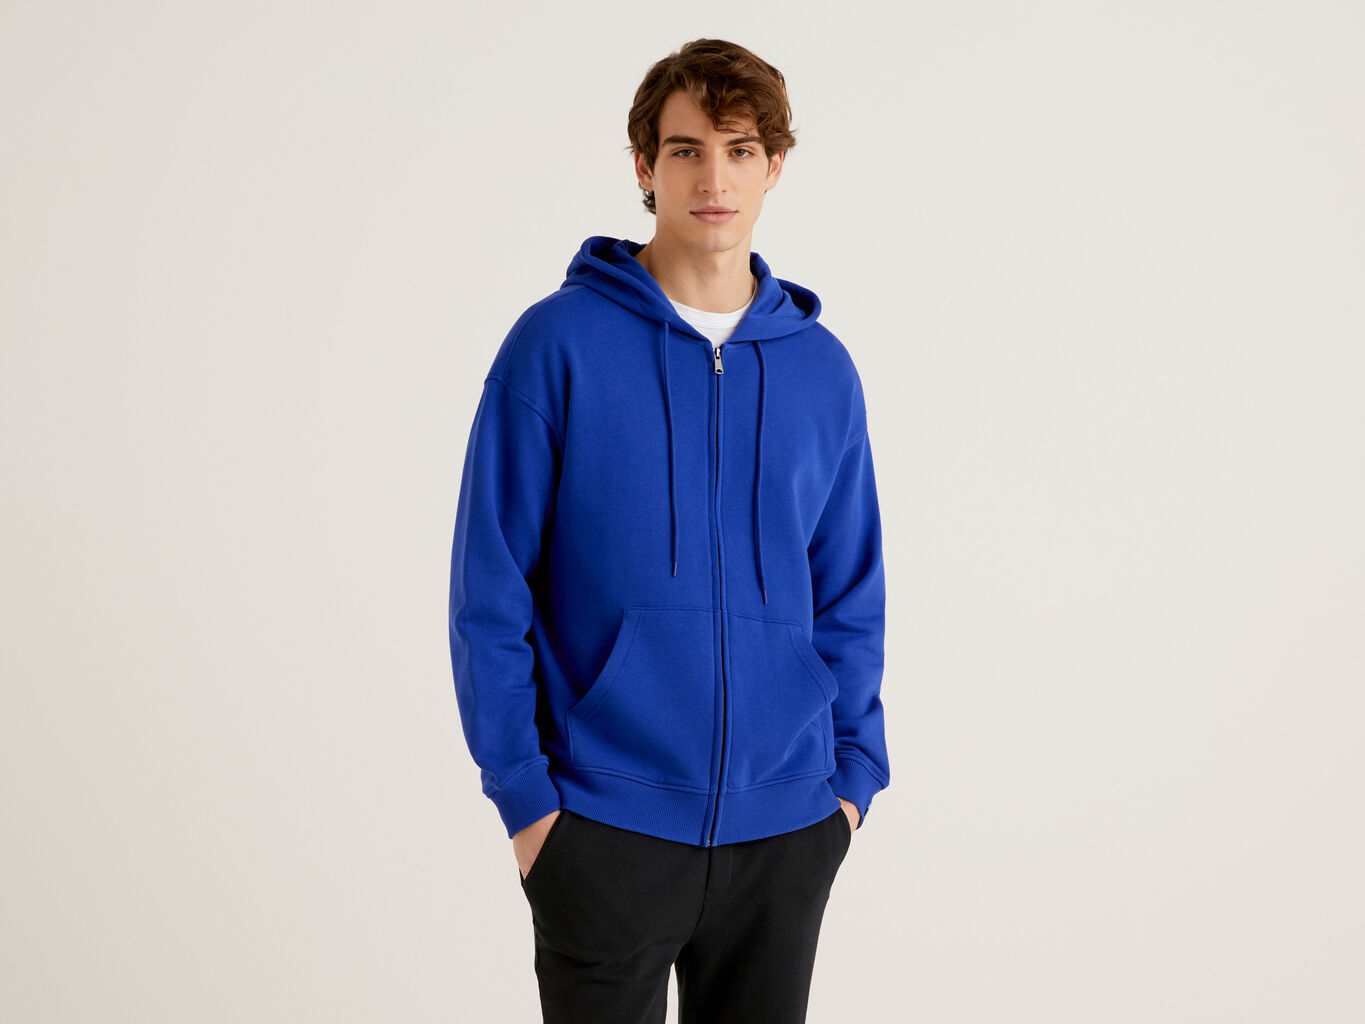 Zip-Up Hoodies For Men: The Ultimate Guide To Styling These Classics